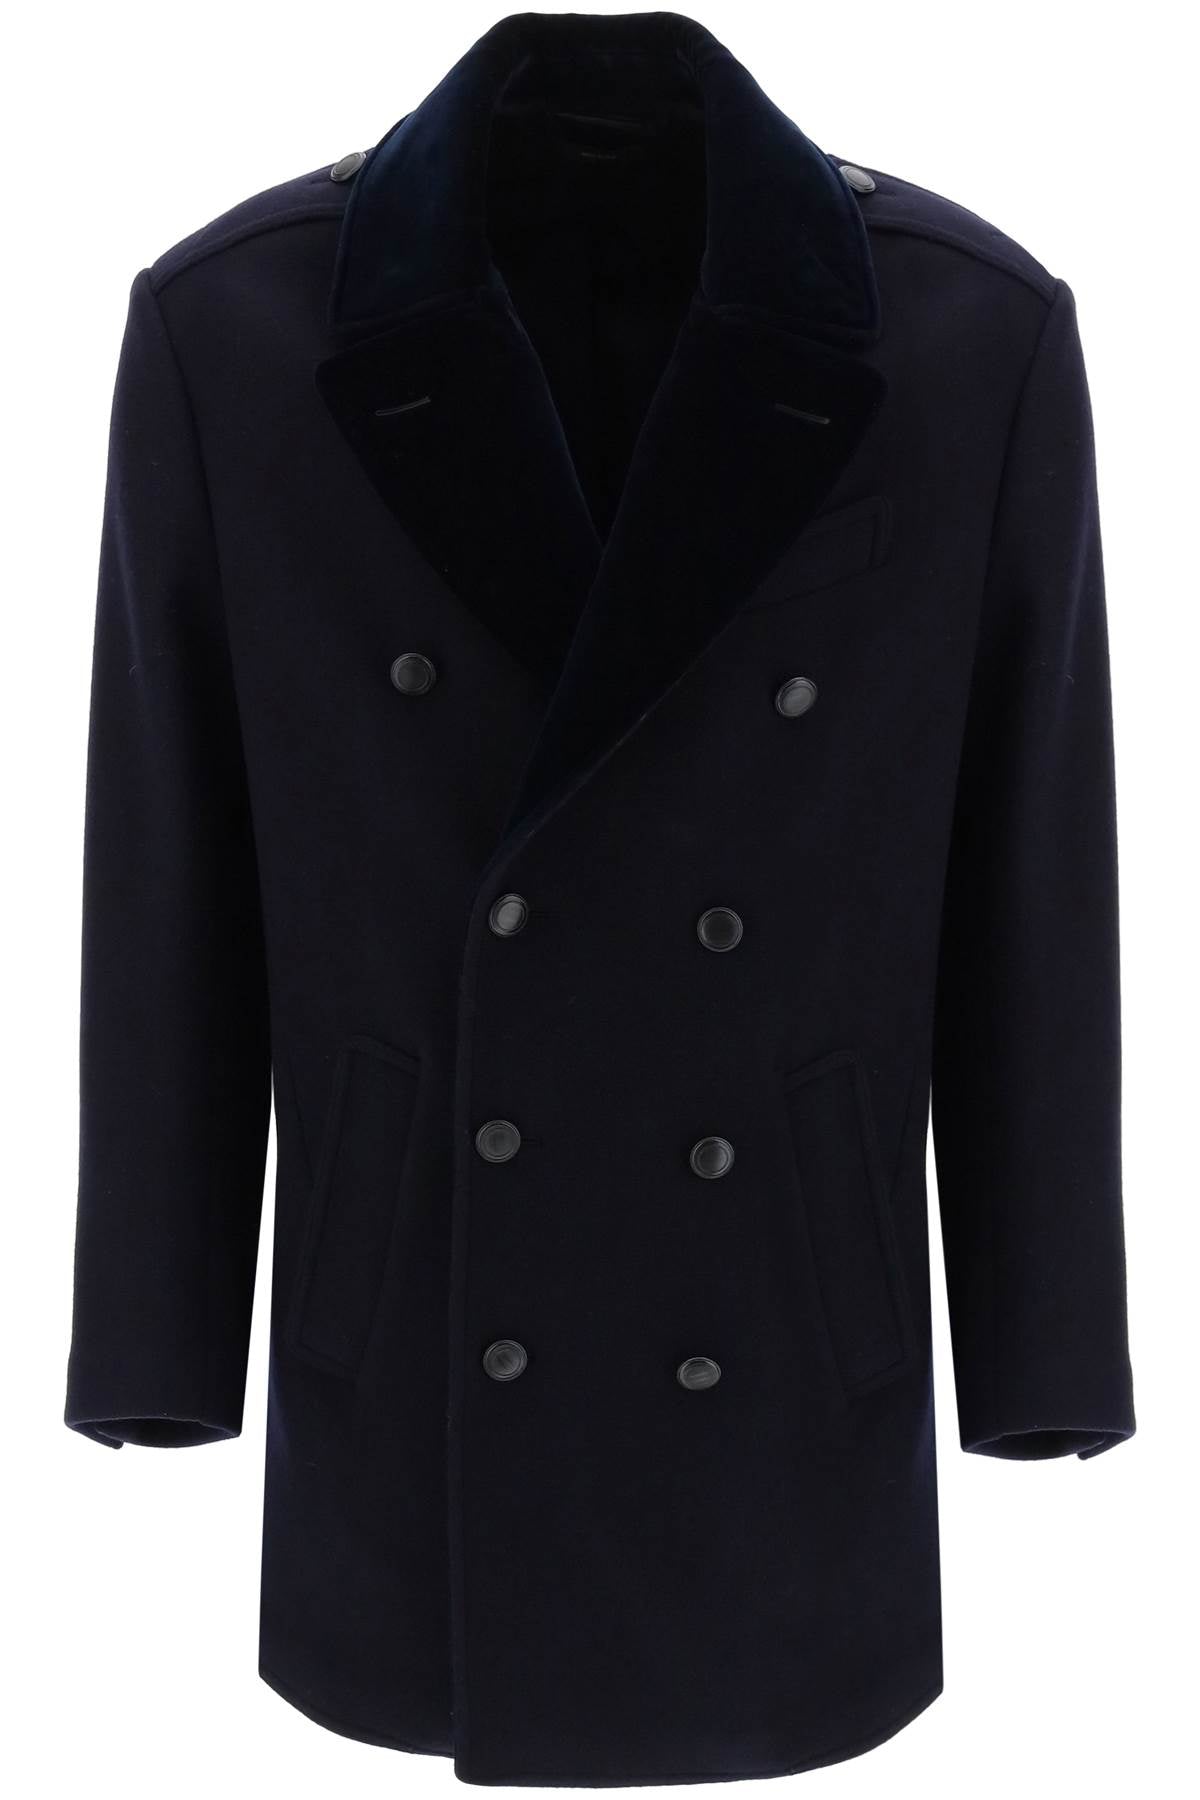 TOM FORD Double-Breasted Wool Peacoat for Men - FW23 Collection